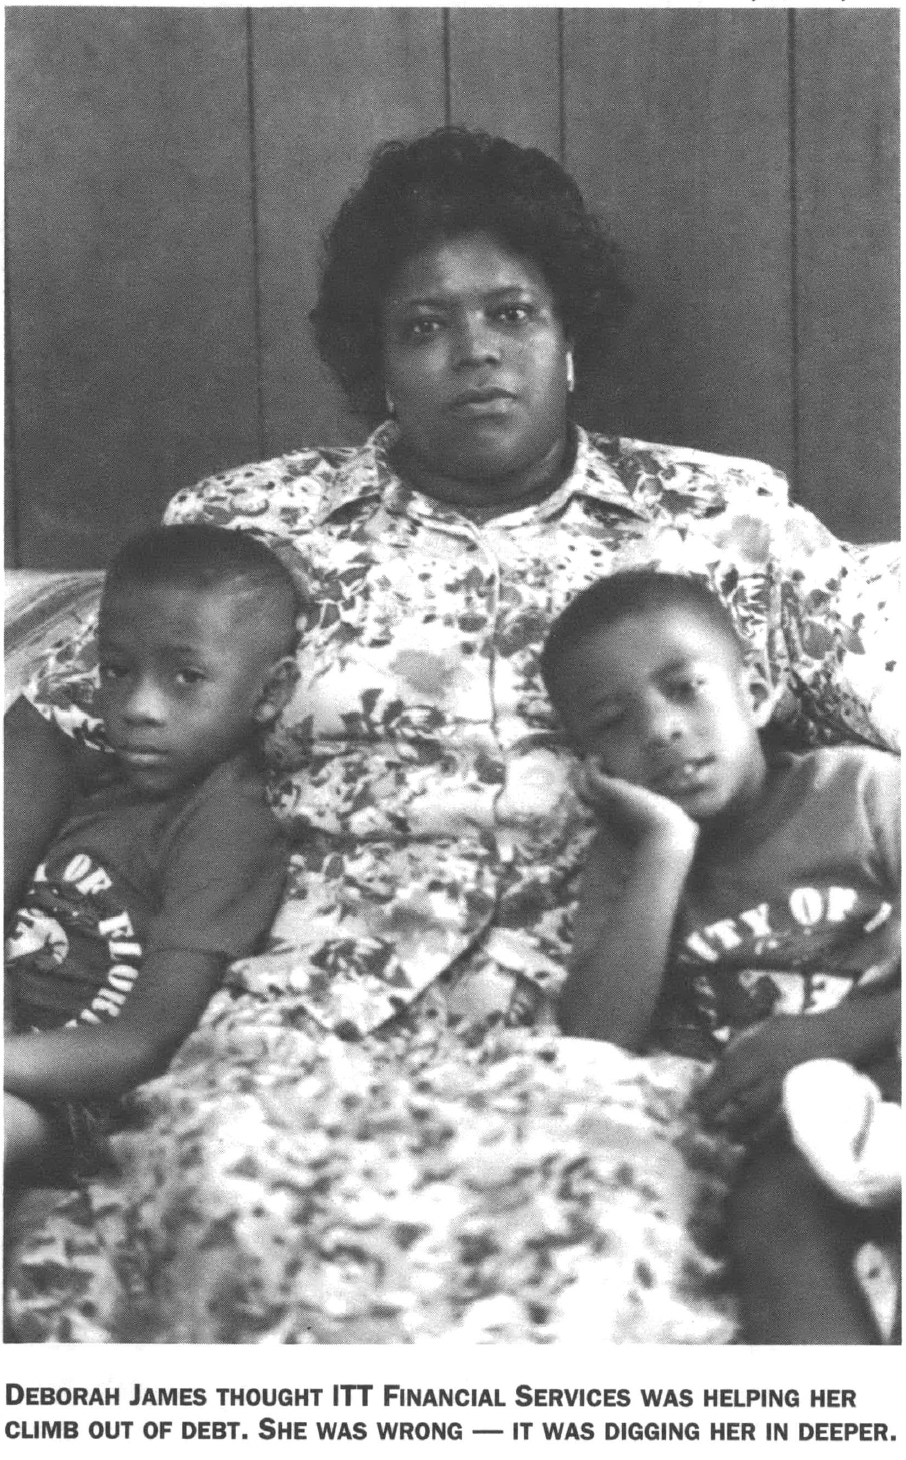 Black woman in floral dress seated holding two young children